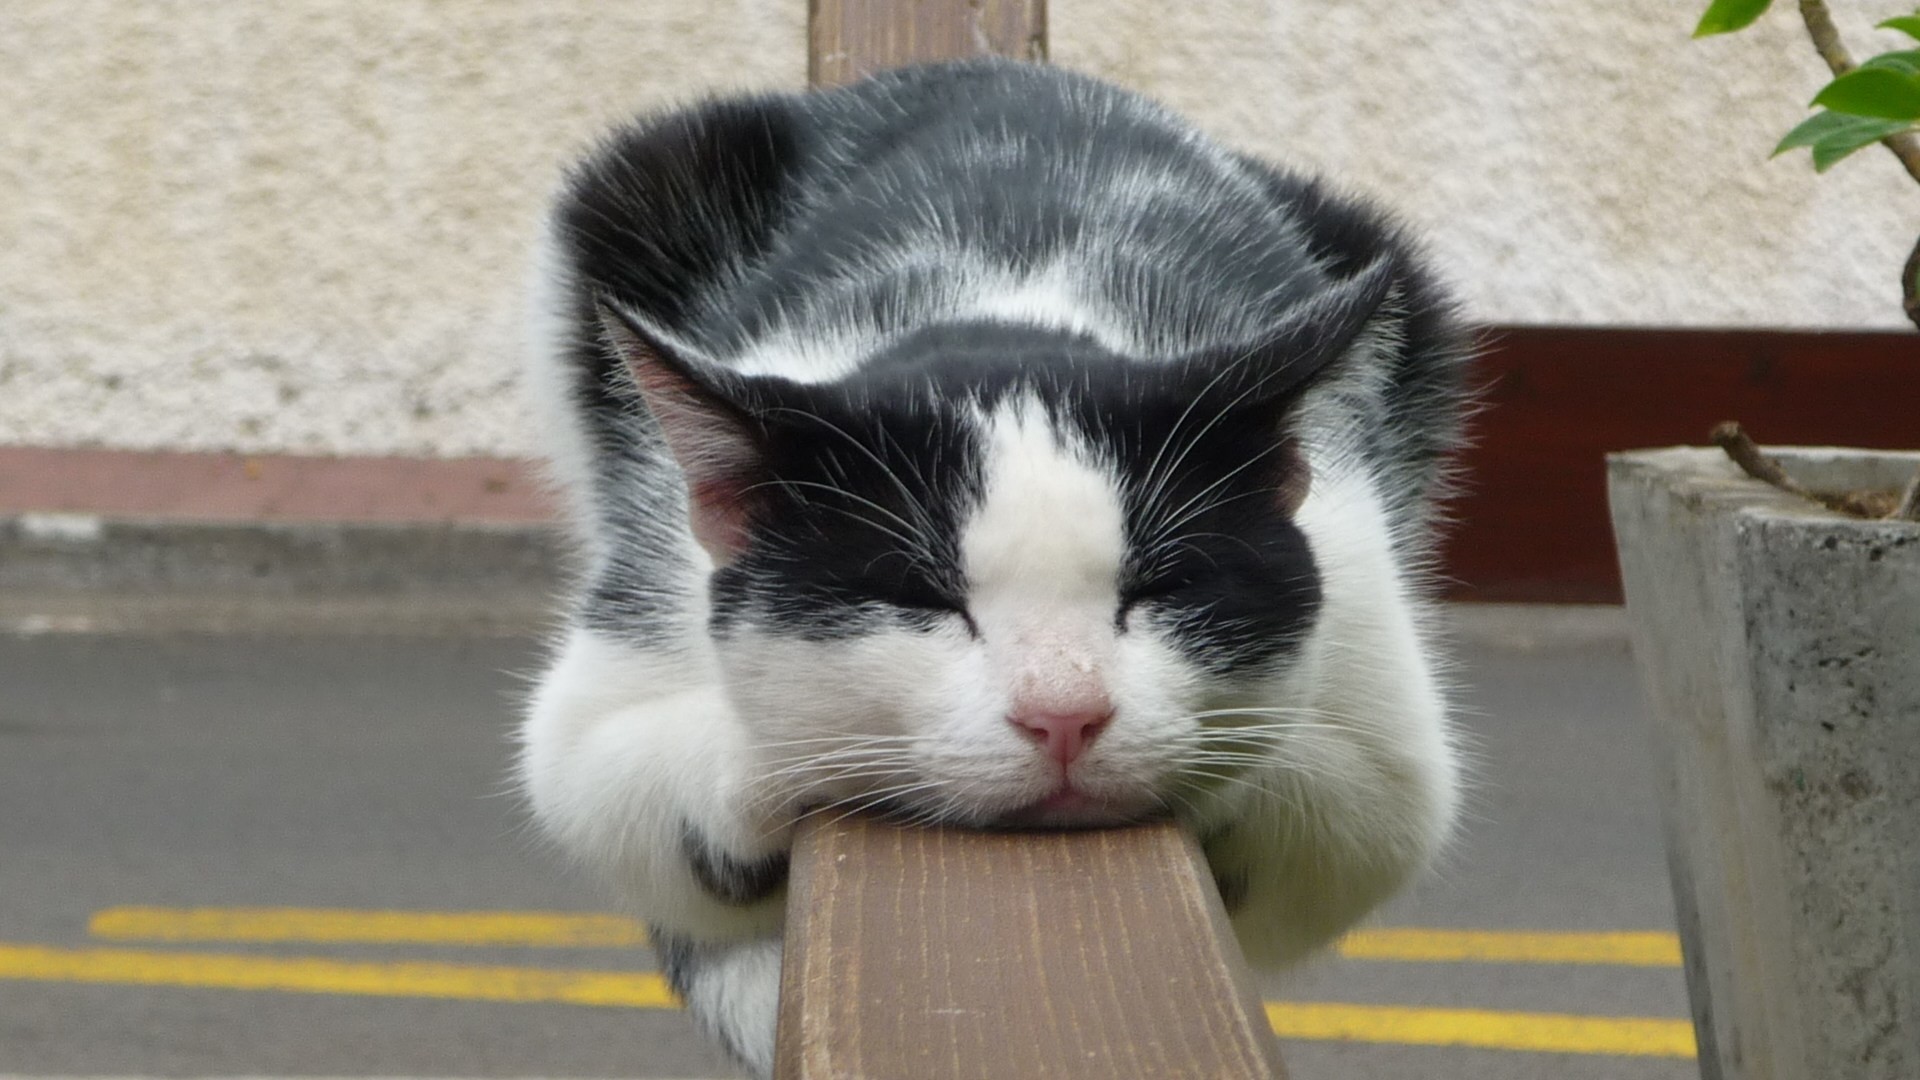 1920x1080, These Are Interesting 20 Pictures Of Cute - Cat Sleeping On Railing - HD Wallpaper 